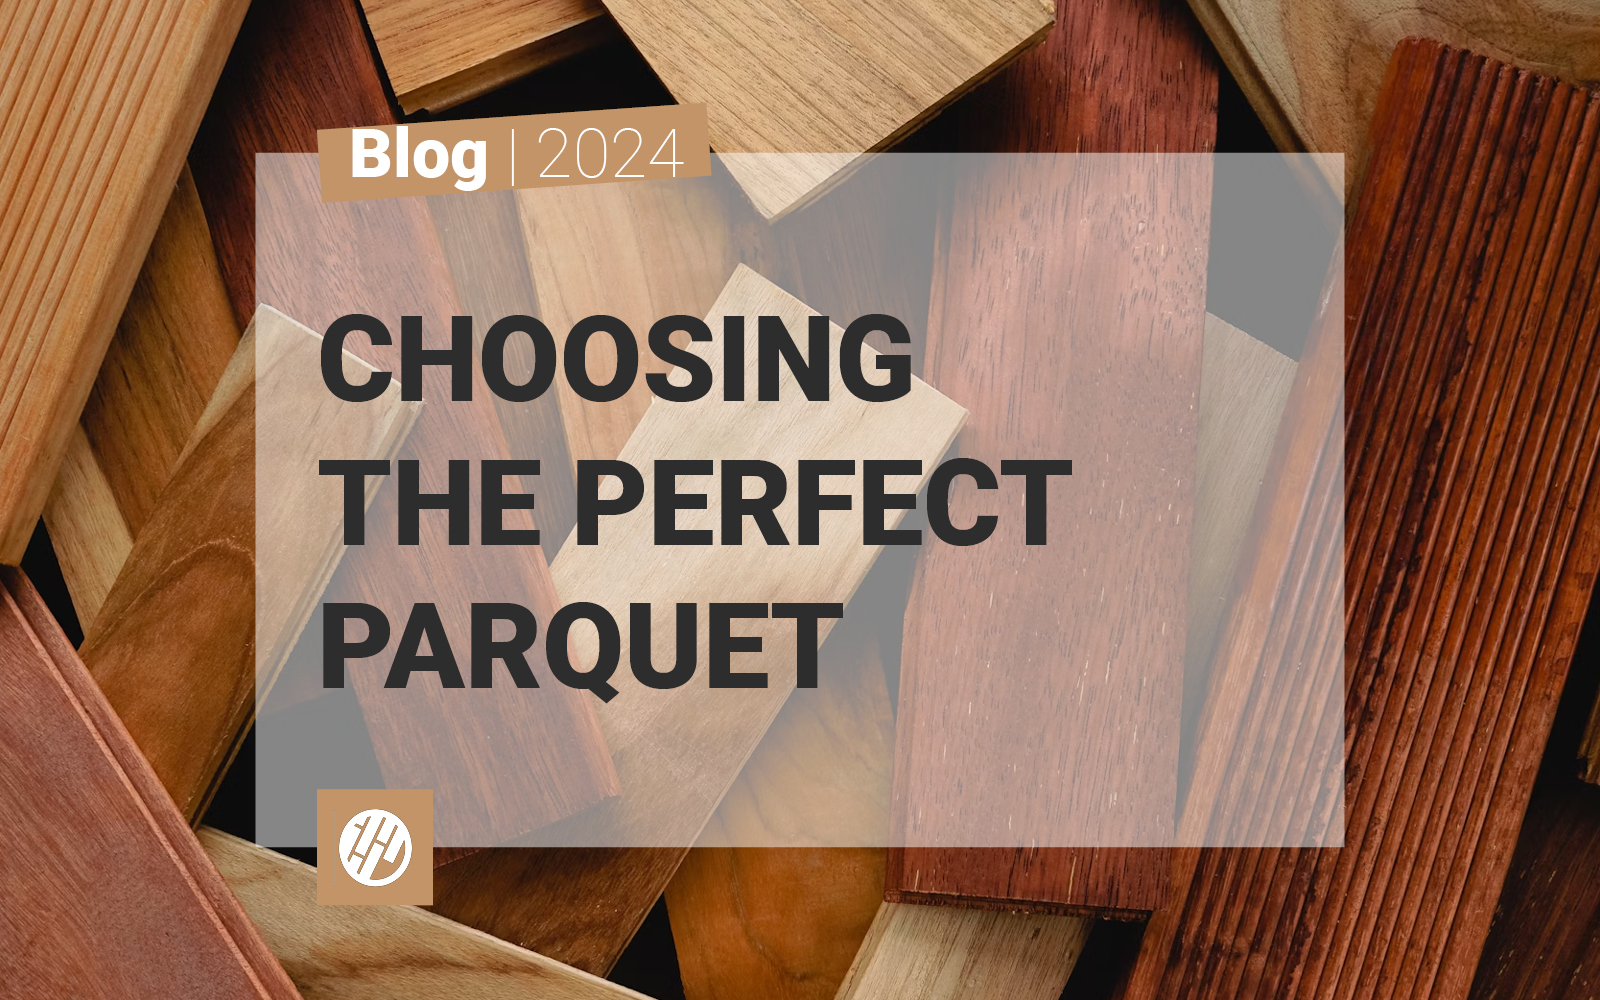 Choosing the perfect parquet: practical tips and latest design trends